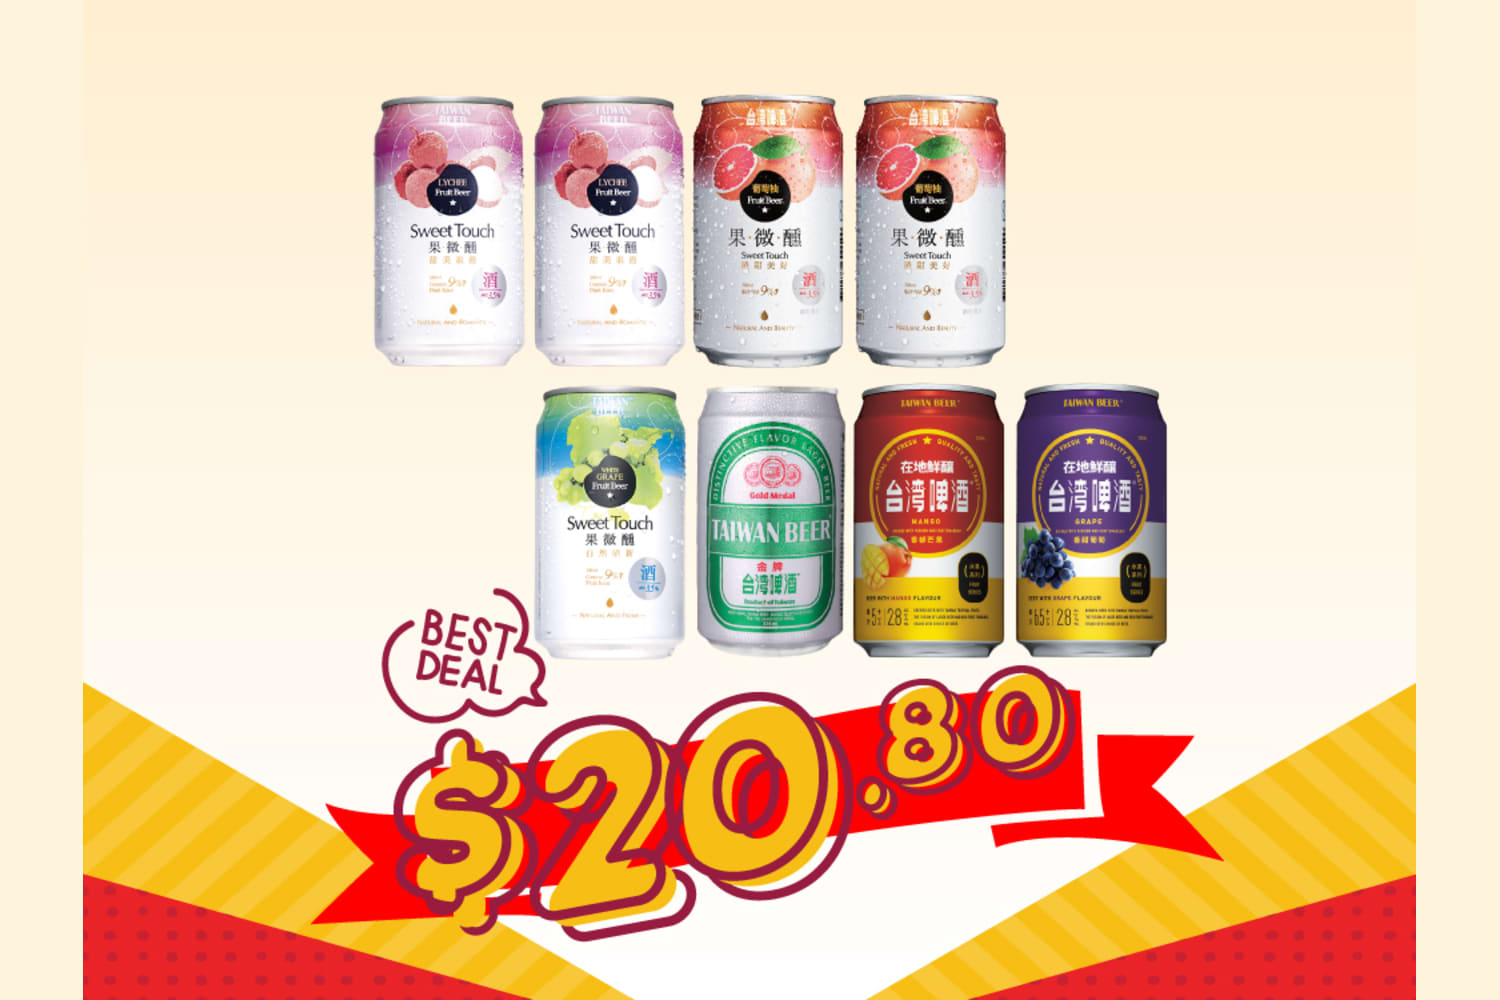 8 x Assorted Taiwan Beer [Limited Stock] at OleOle Singapore Confectionery & Liquor - Get Deals, Cashback and Rewards with ShopBack GO